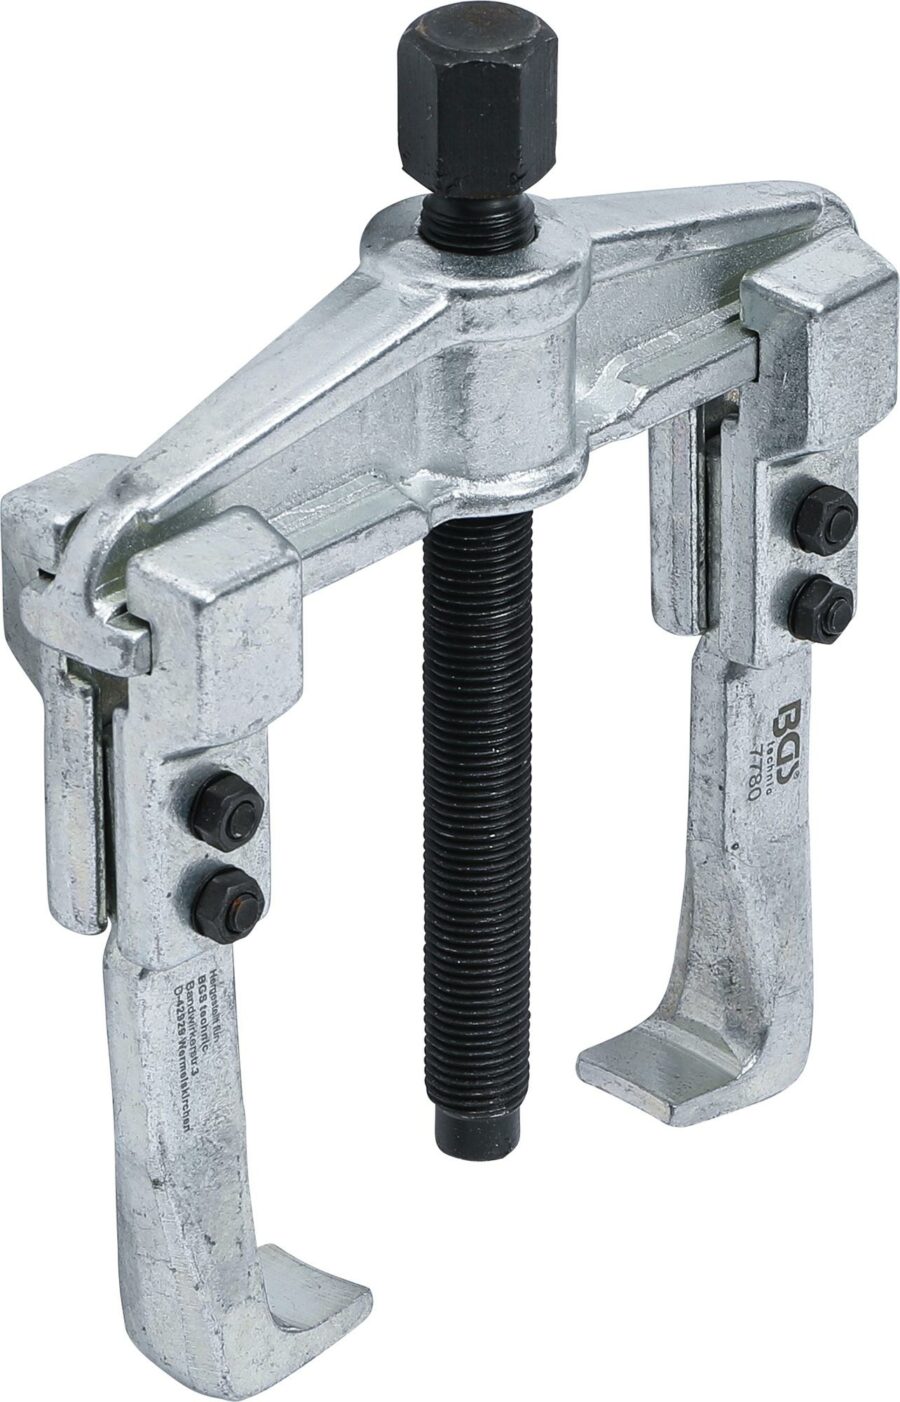 Parallel Puller